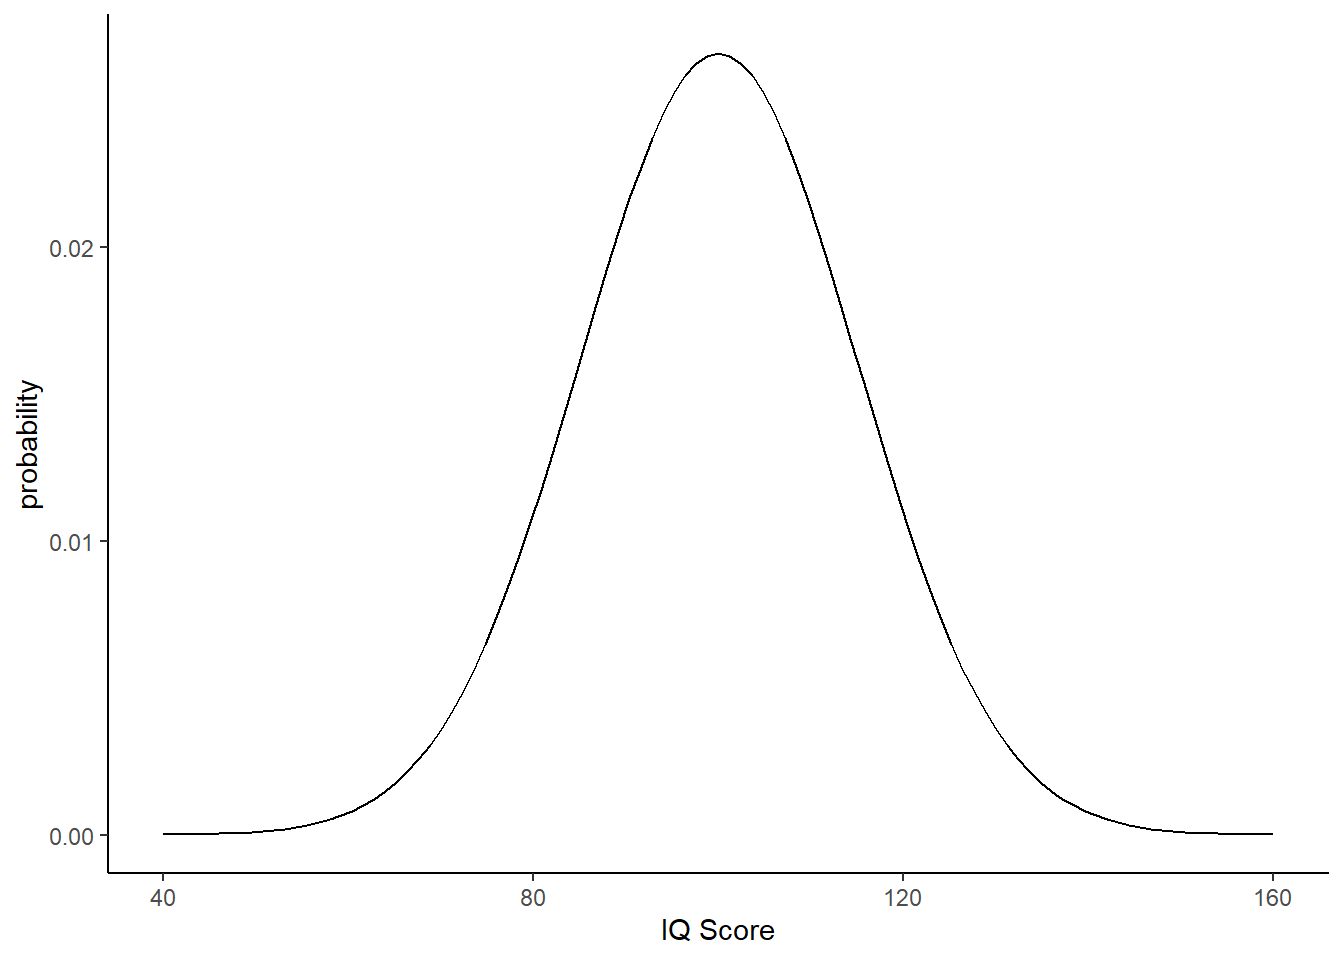 Distribution of IQ scores with mean = 100, sd = 15